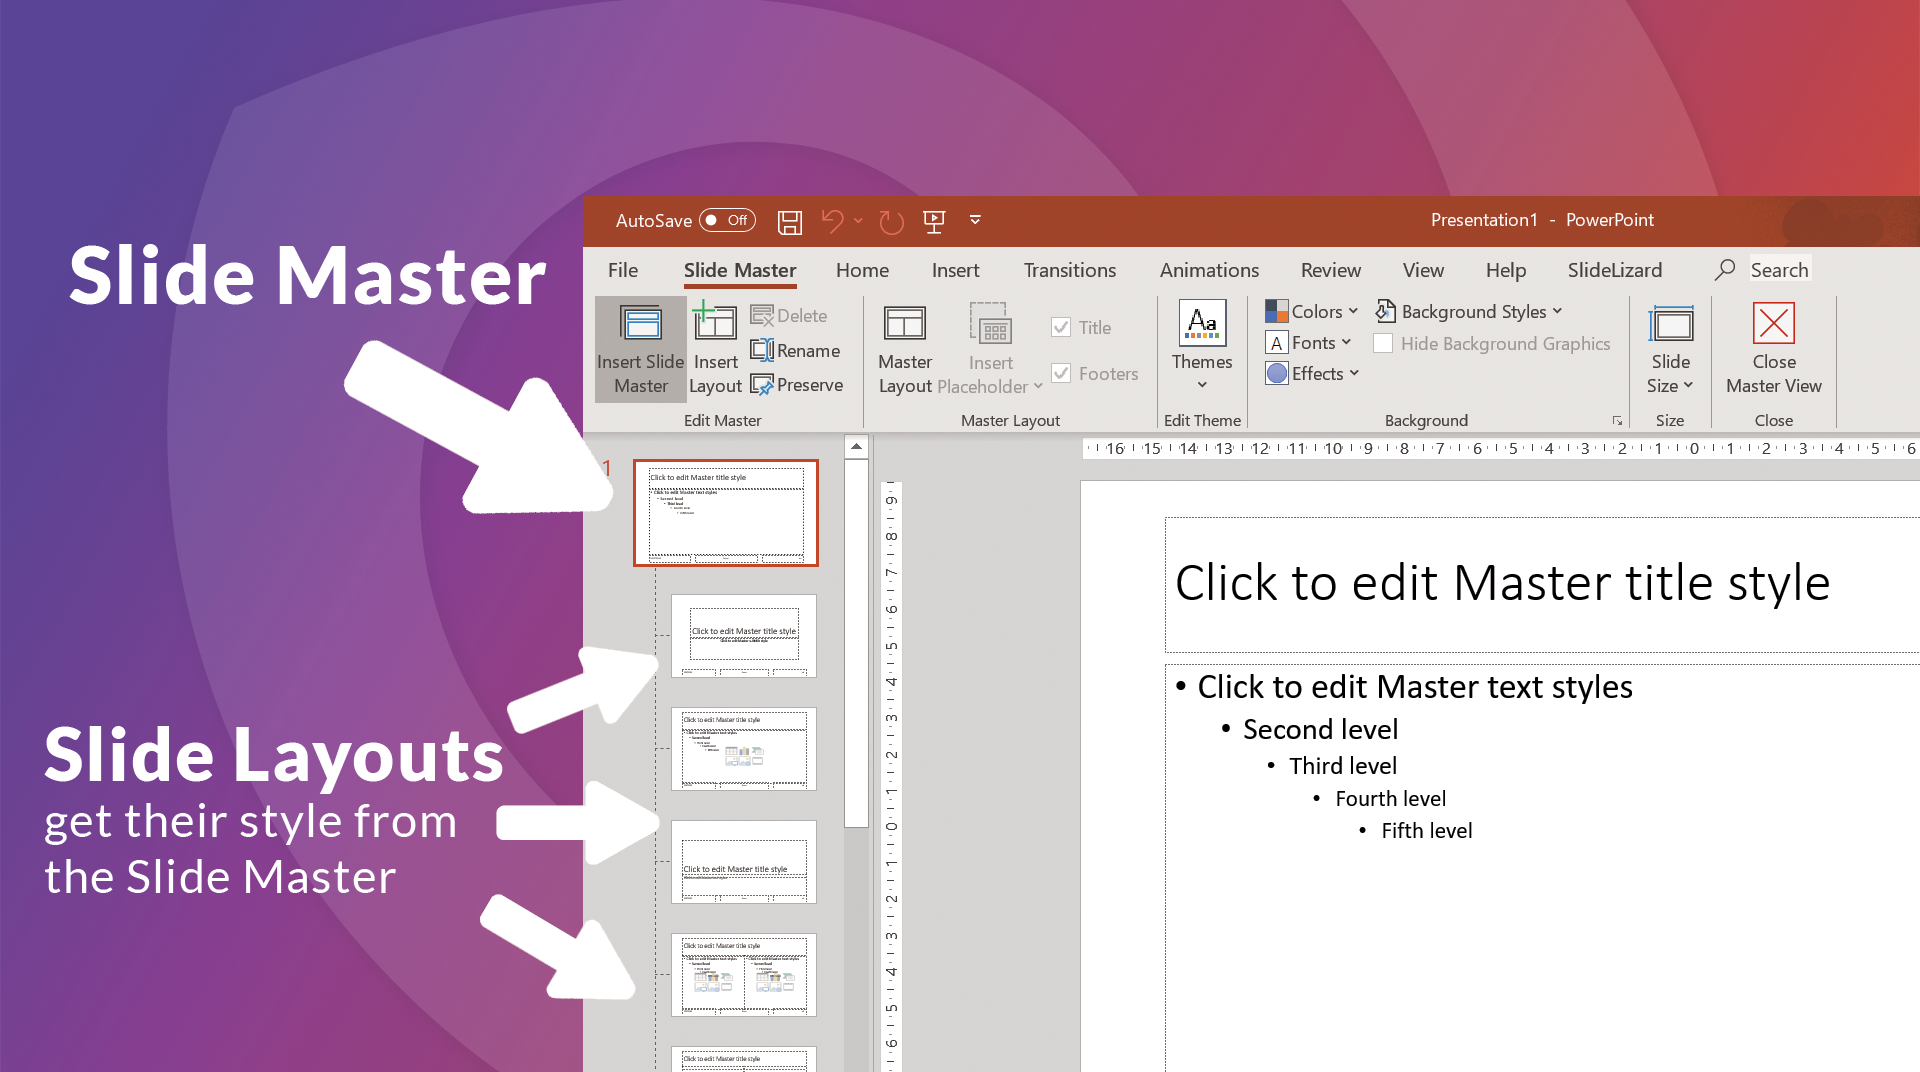 How To Create Your Own PowerPoint Template 2022 SlideLizard 